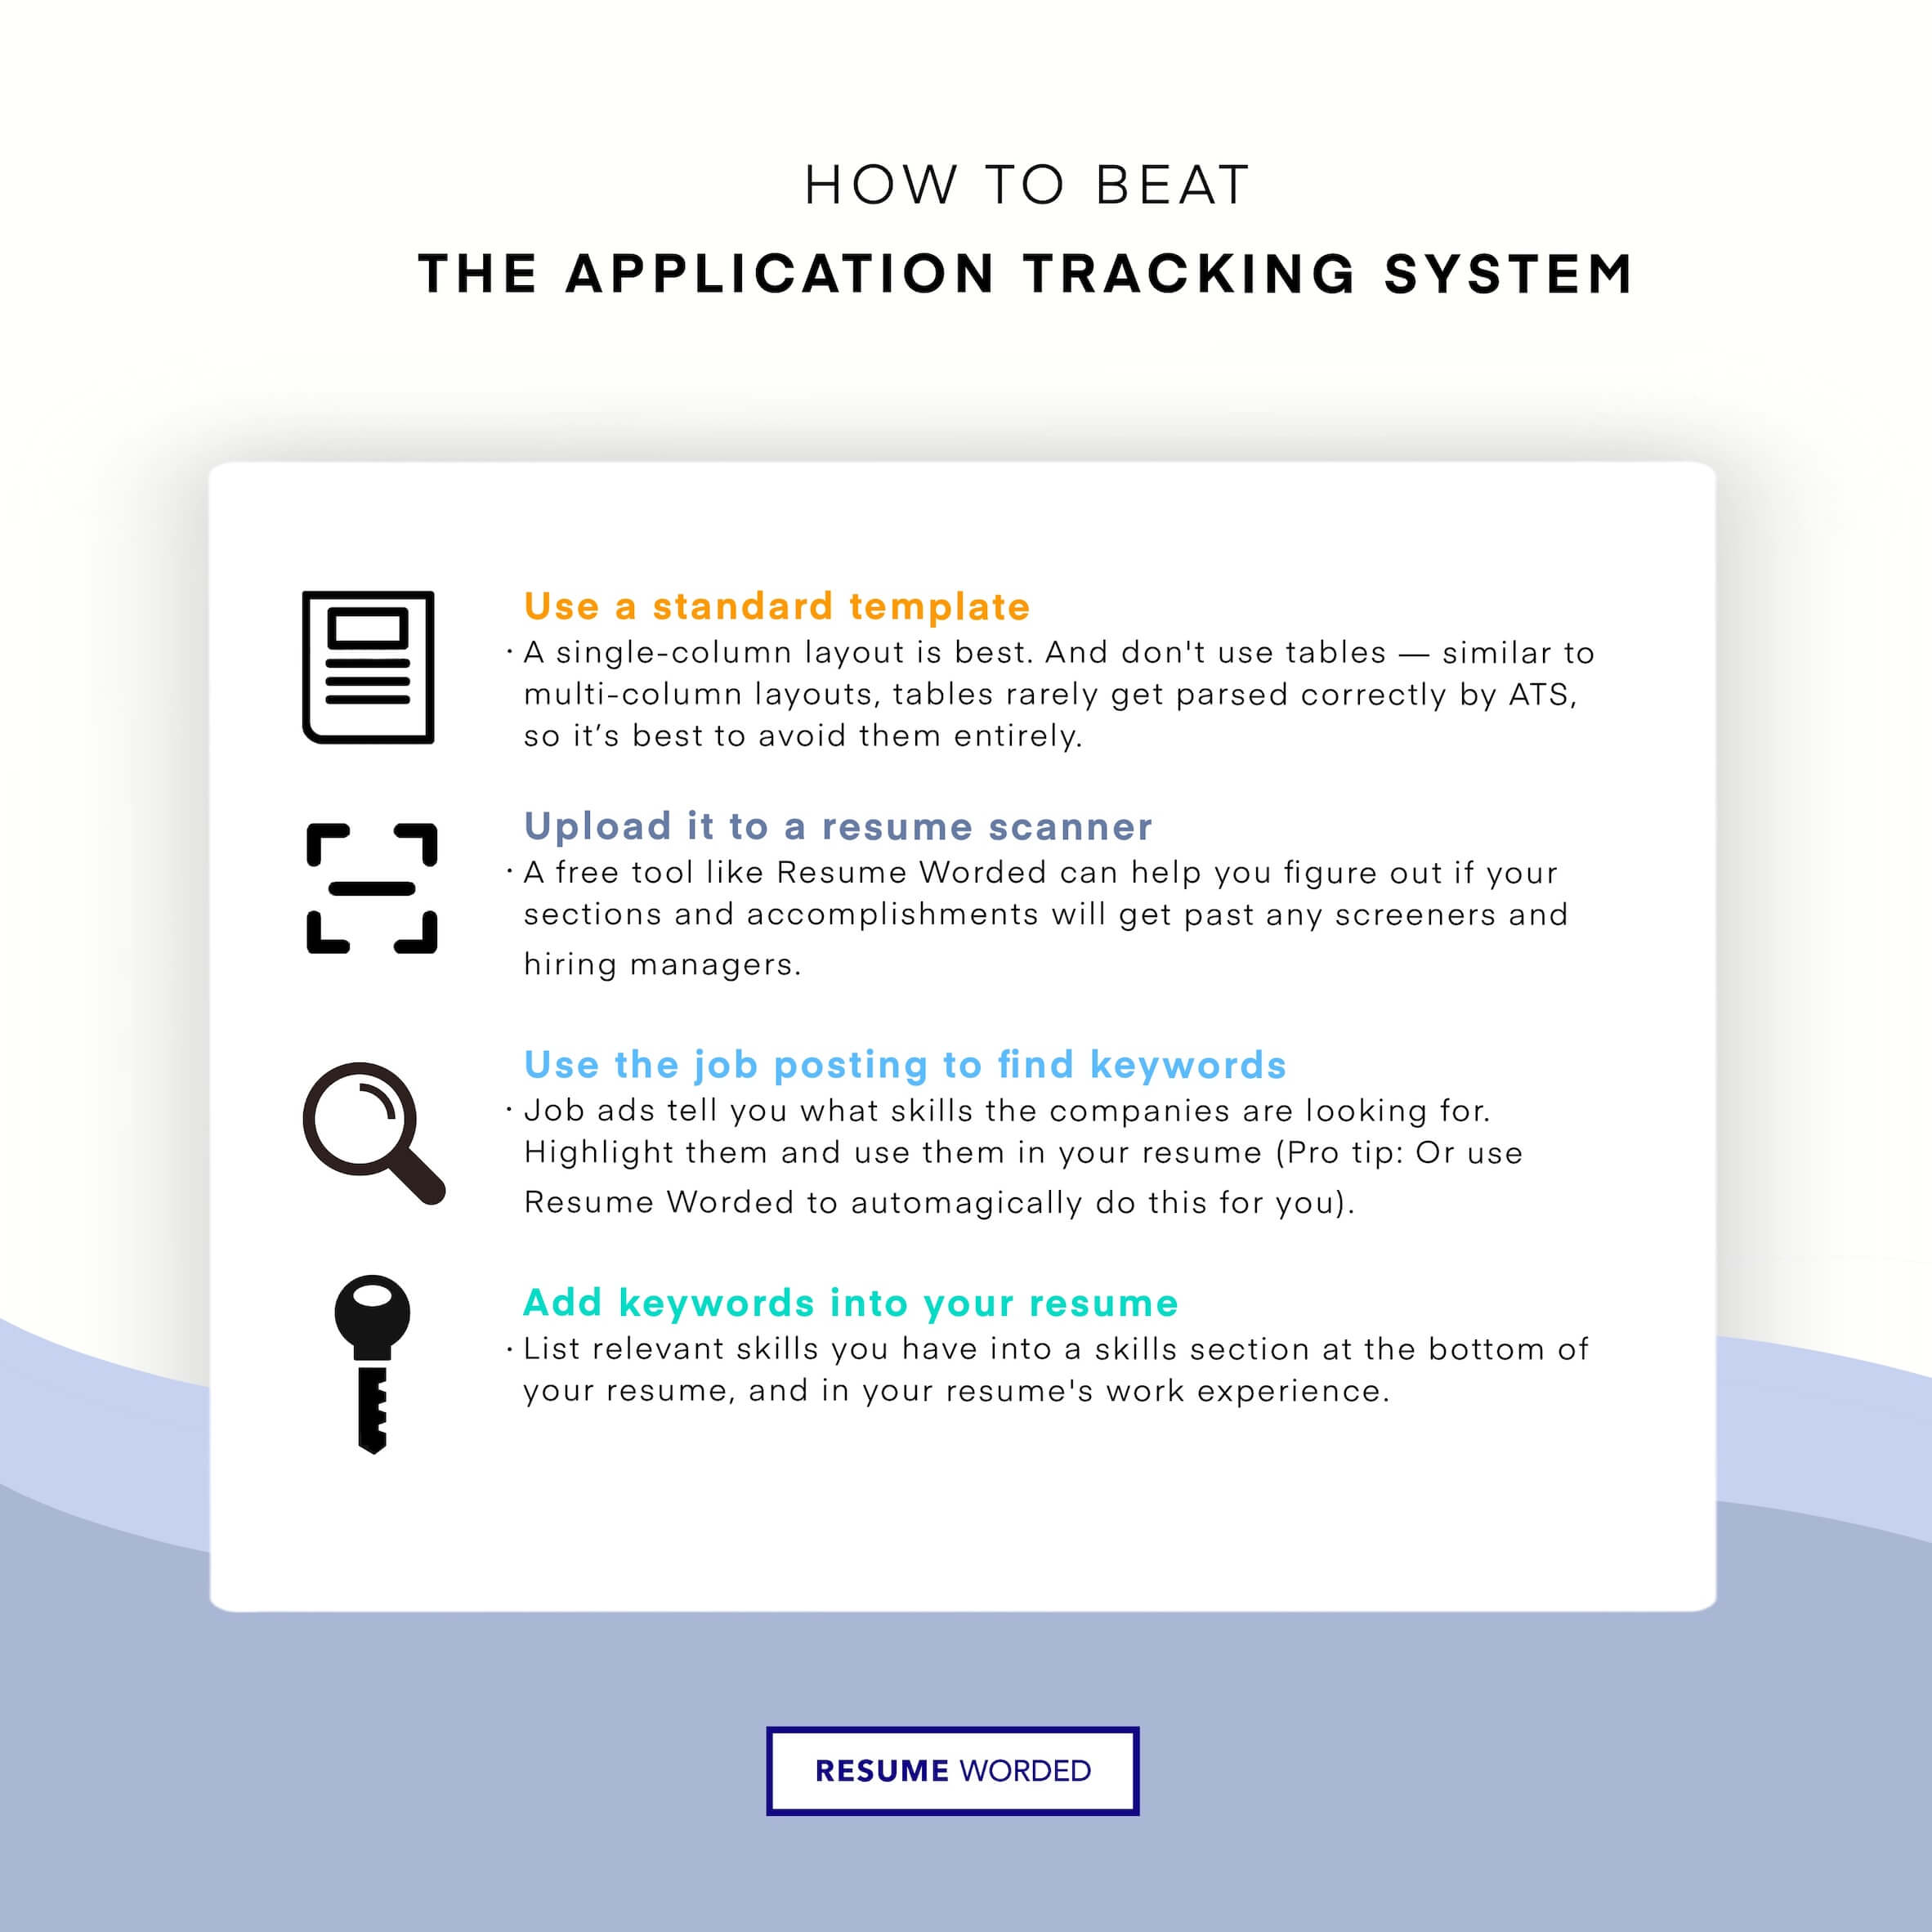 A list of ways to get past the resume screeners and applicant tracking system